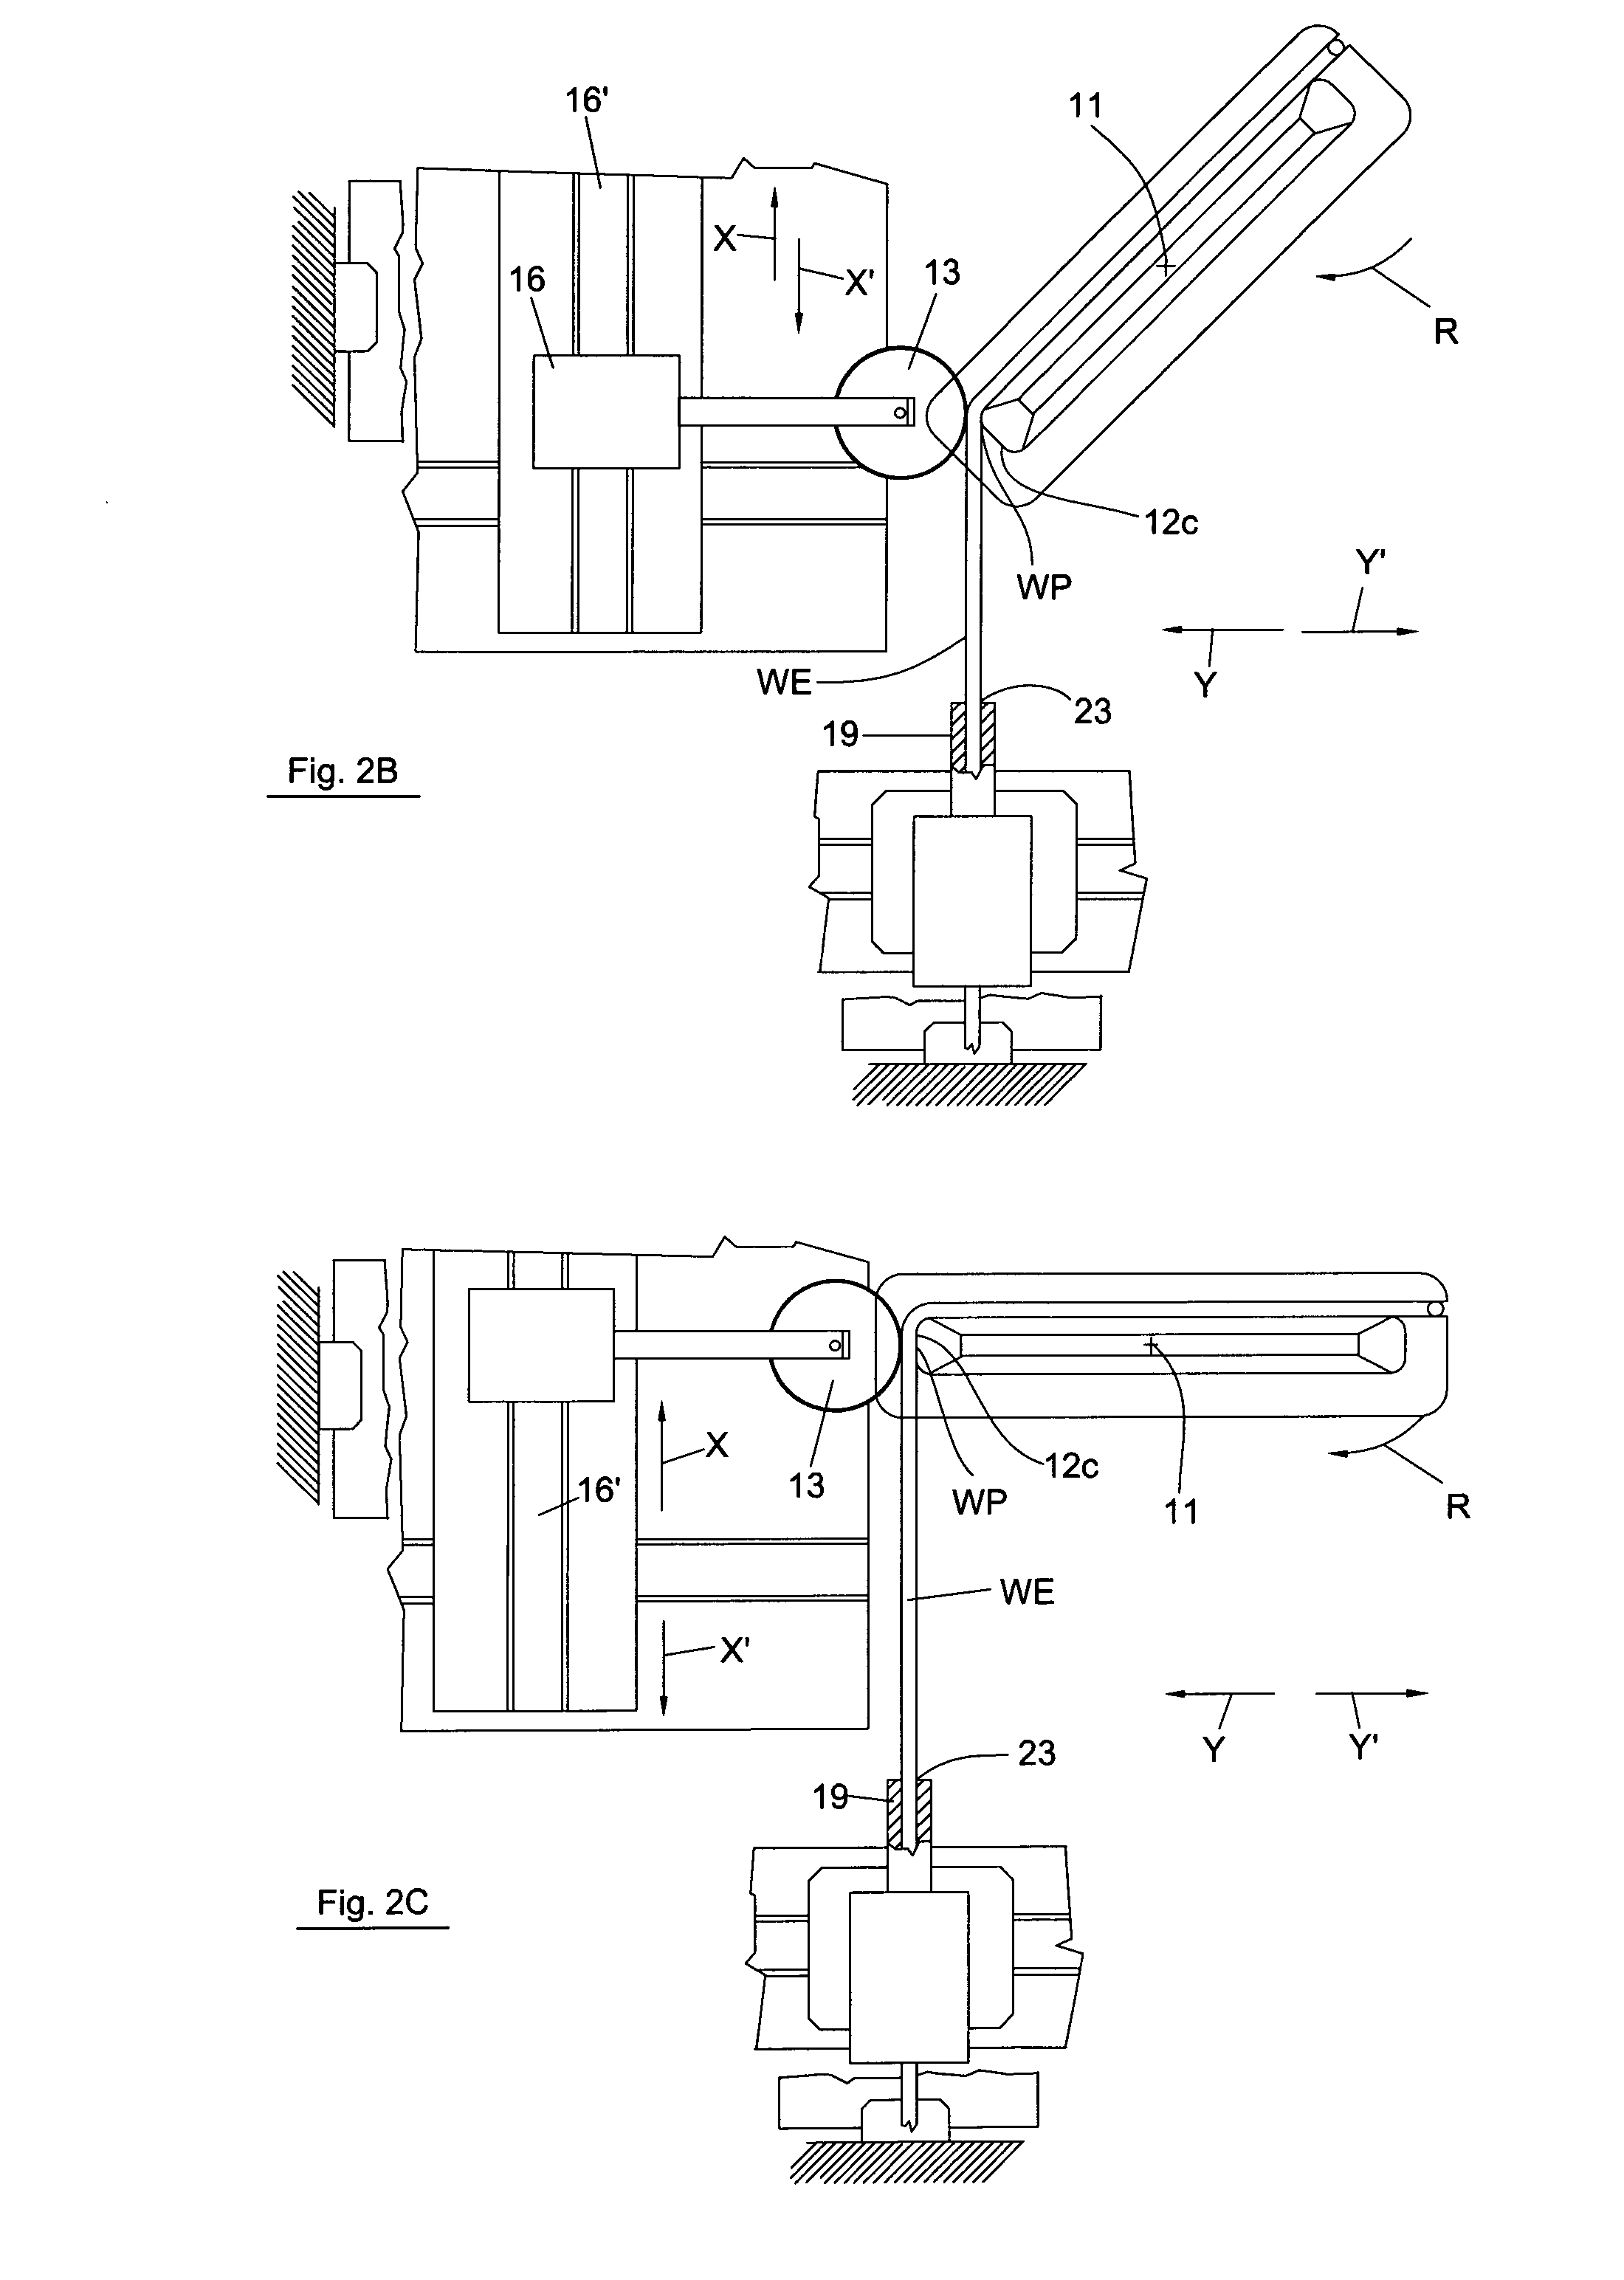 Apparatus and methods for winding supports for coils and single poles of cores of dynamo electric machines